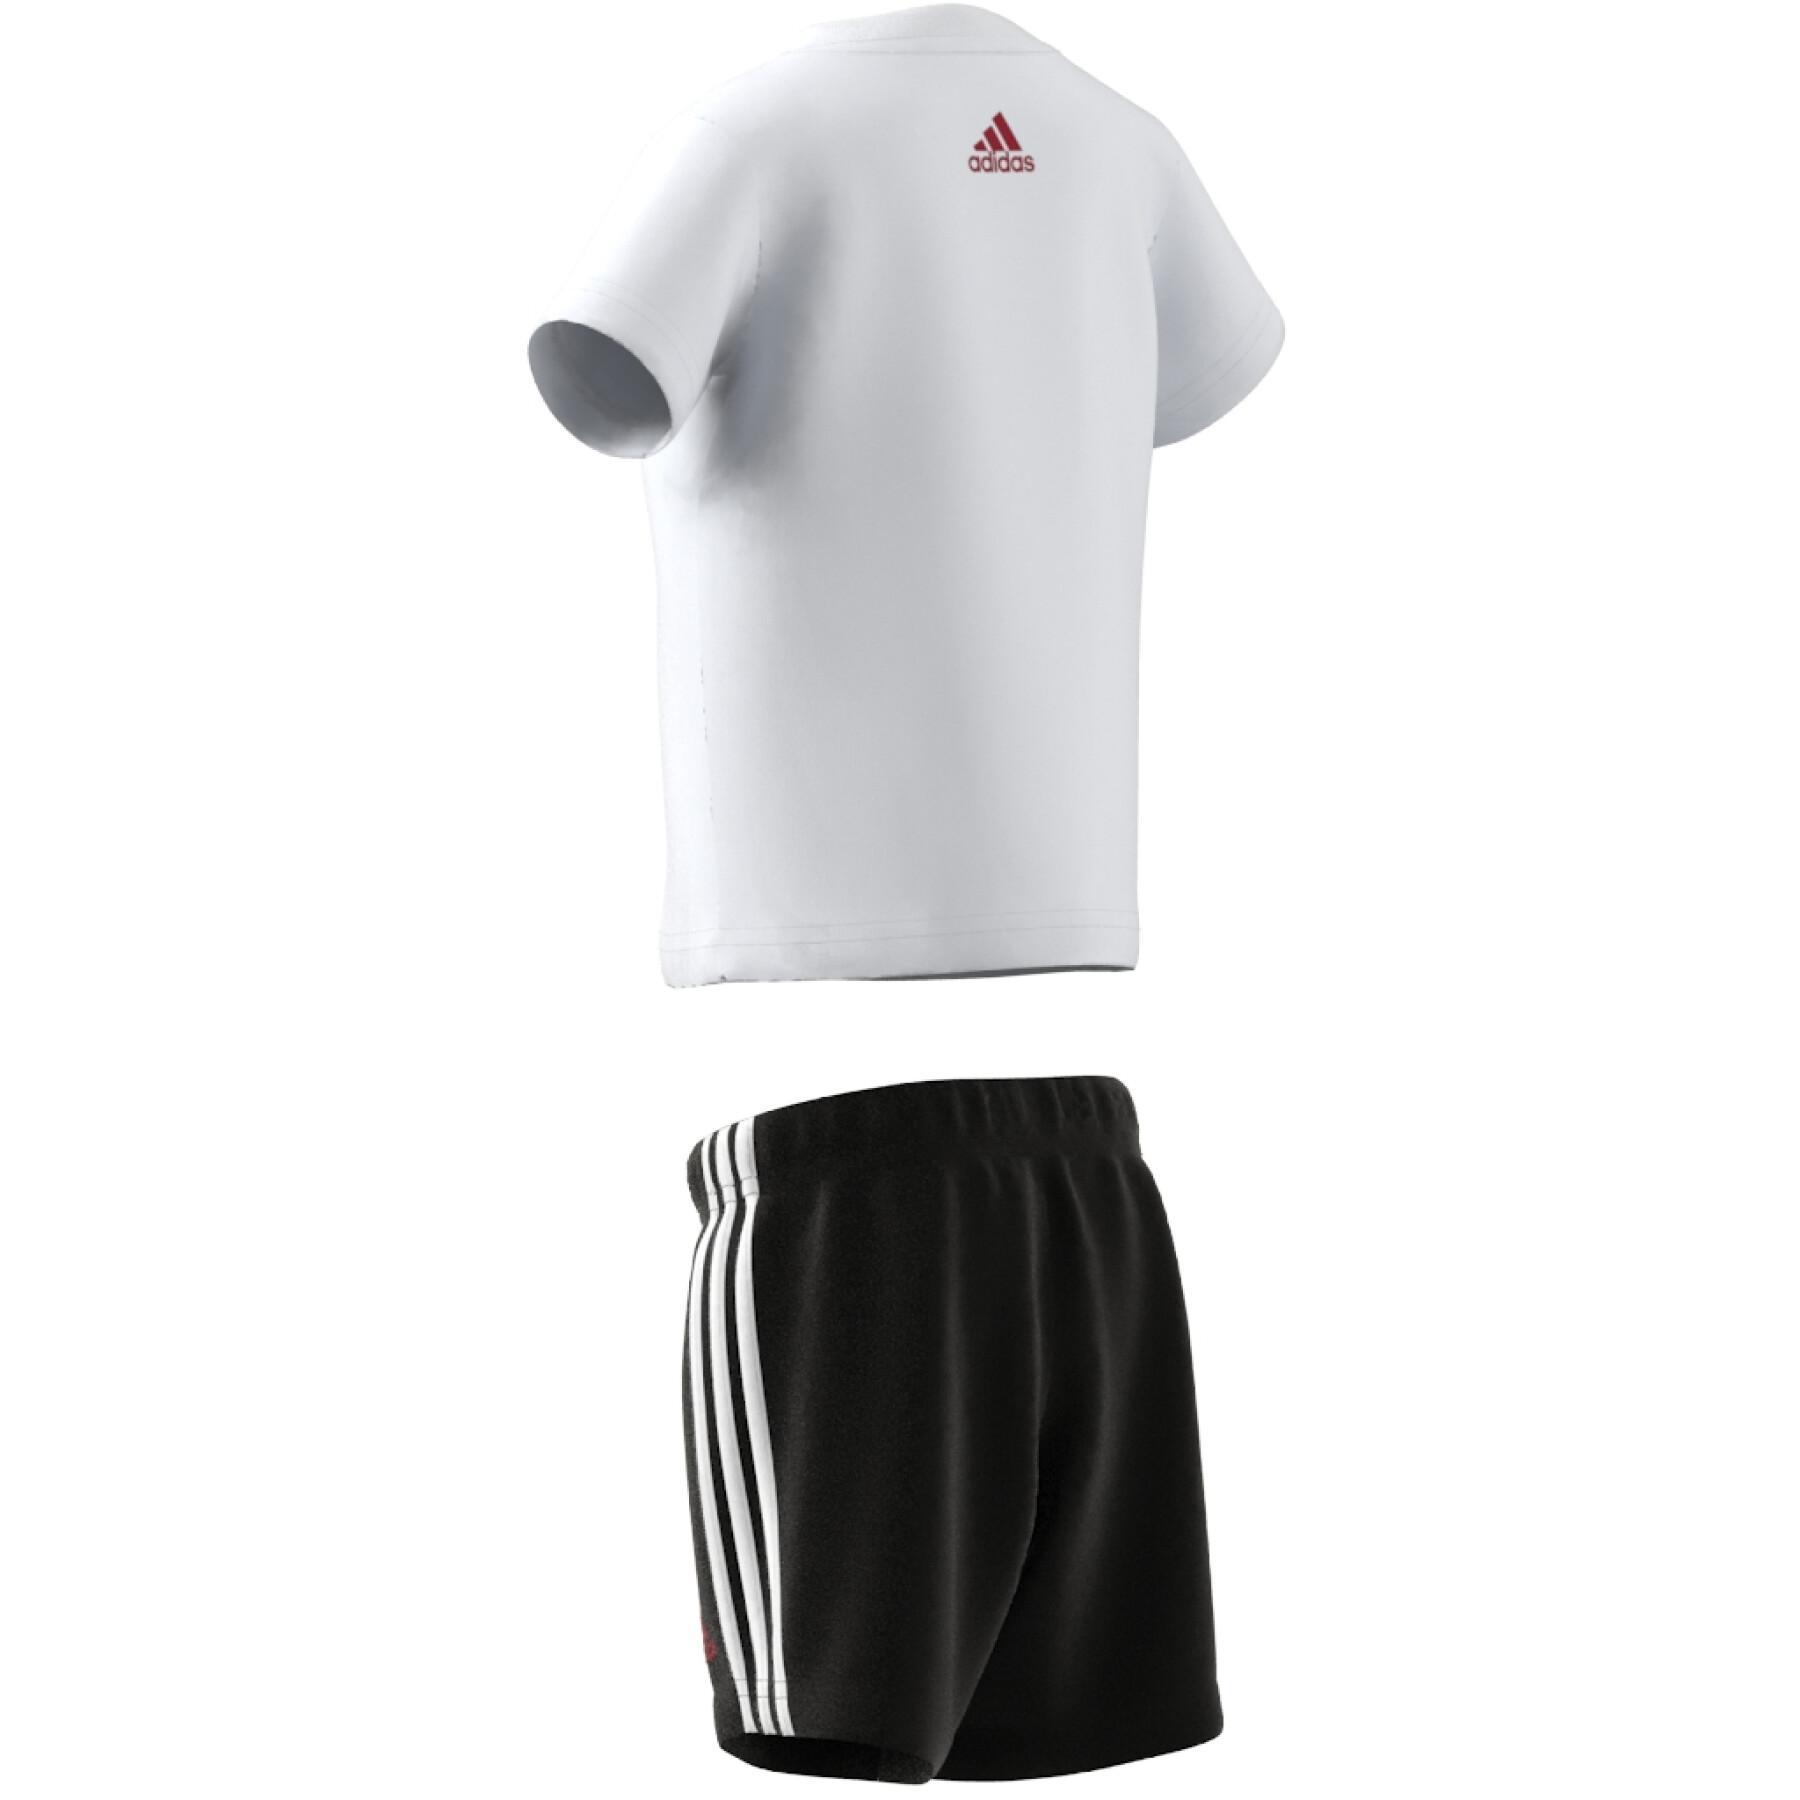 t-shirt Brands - Organic - adidas set Essentials Lifestyle shorts cotton 3-Stripes adidas - and Lineage